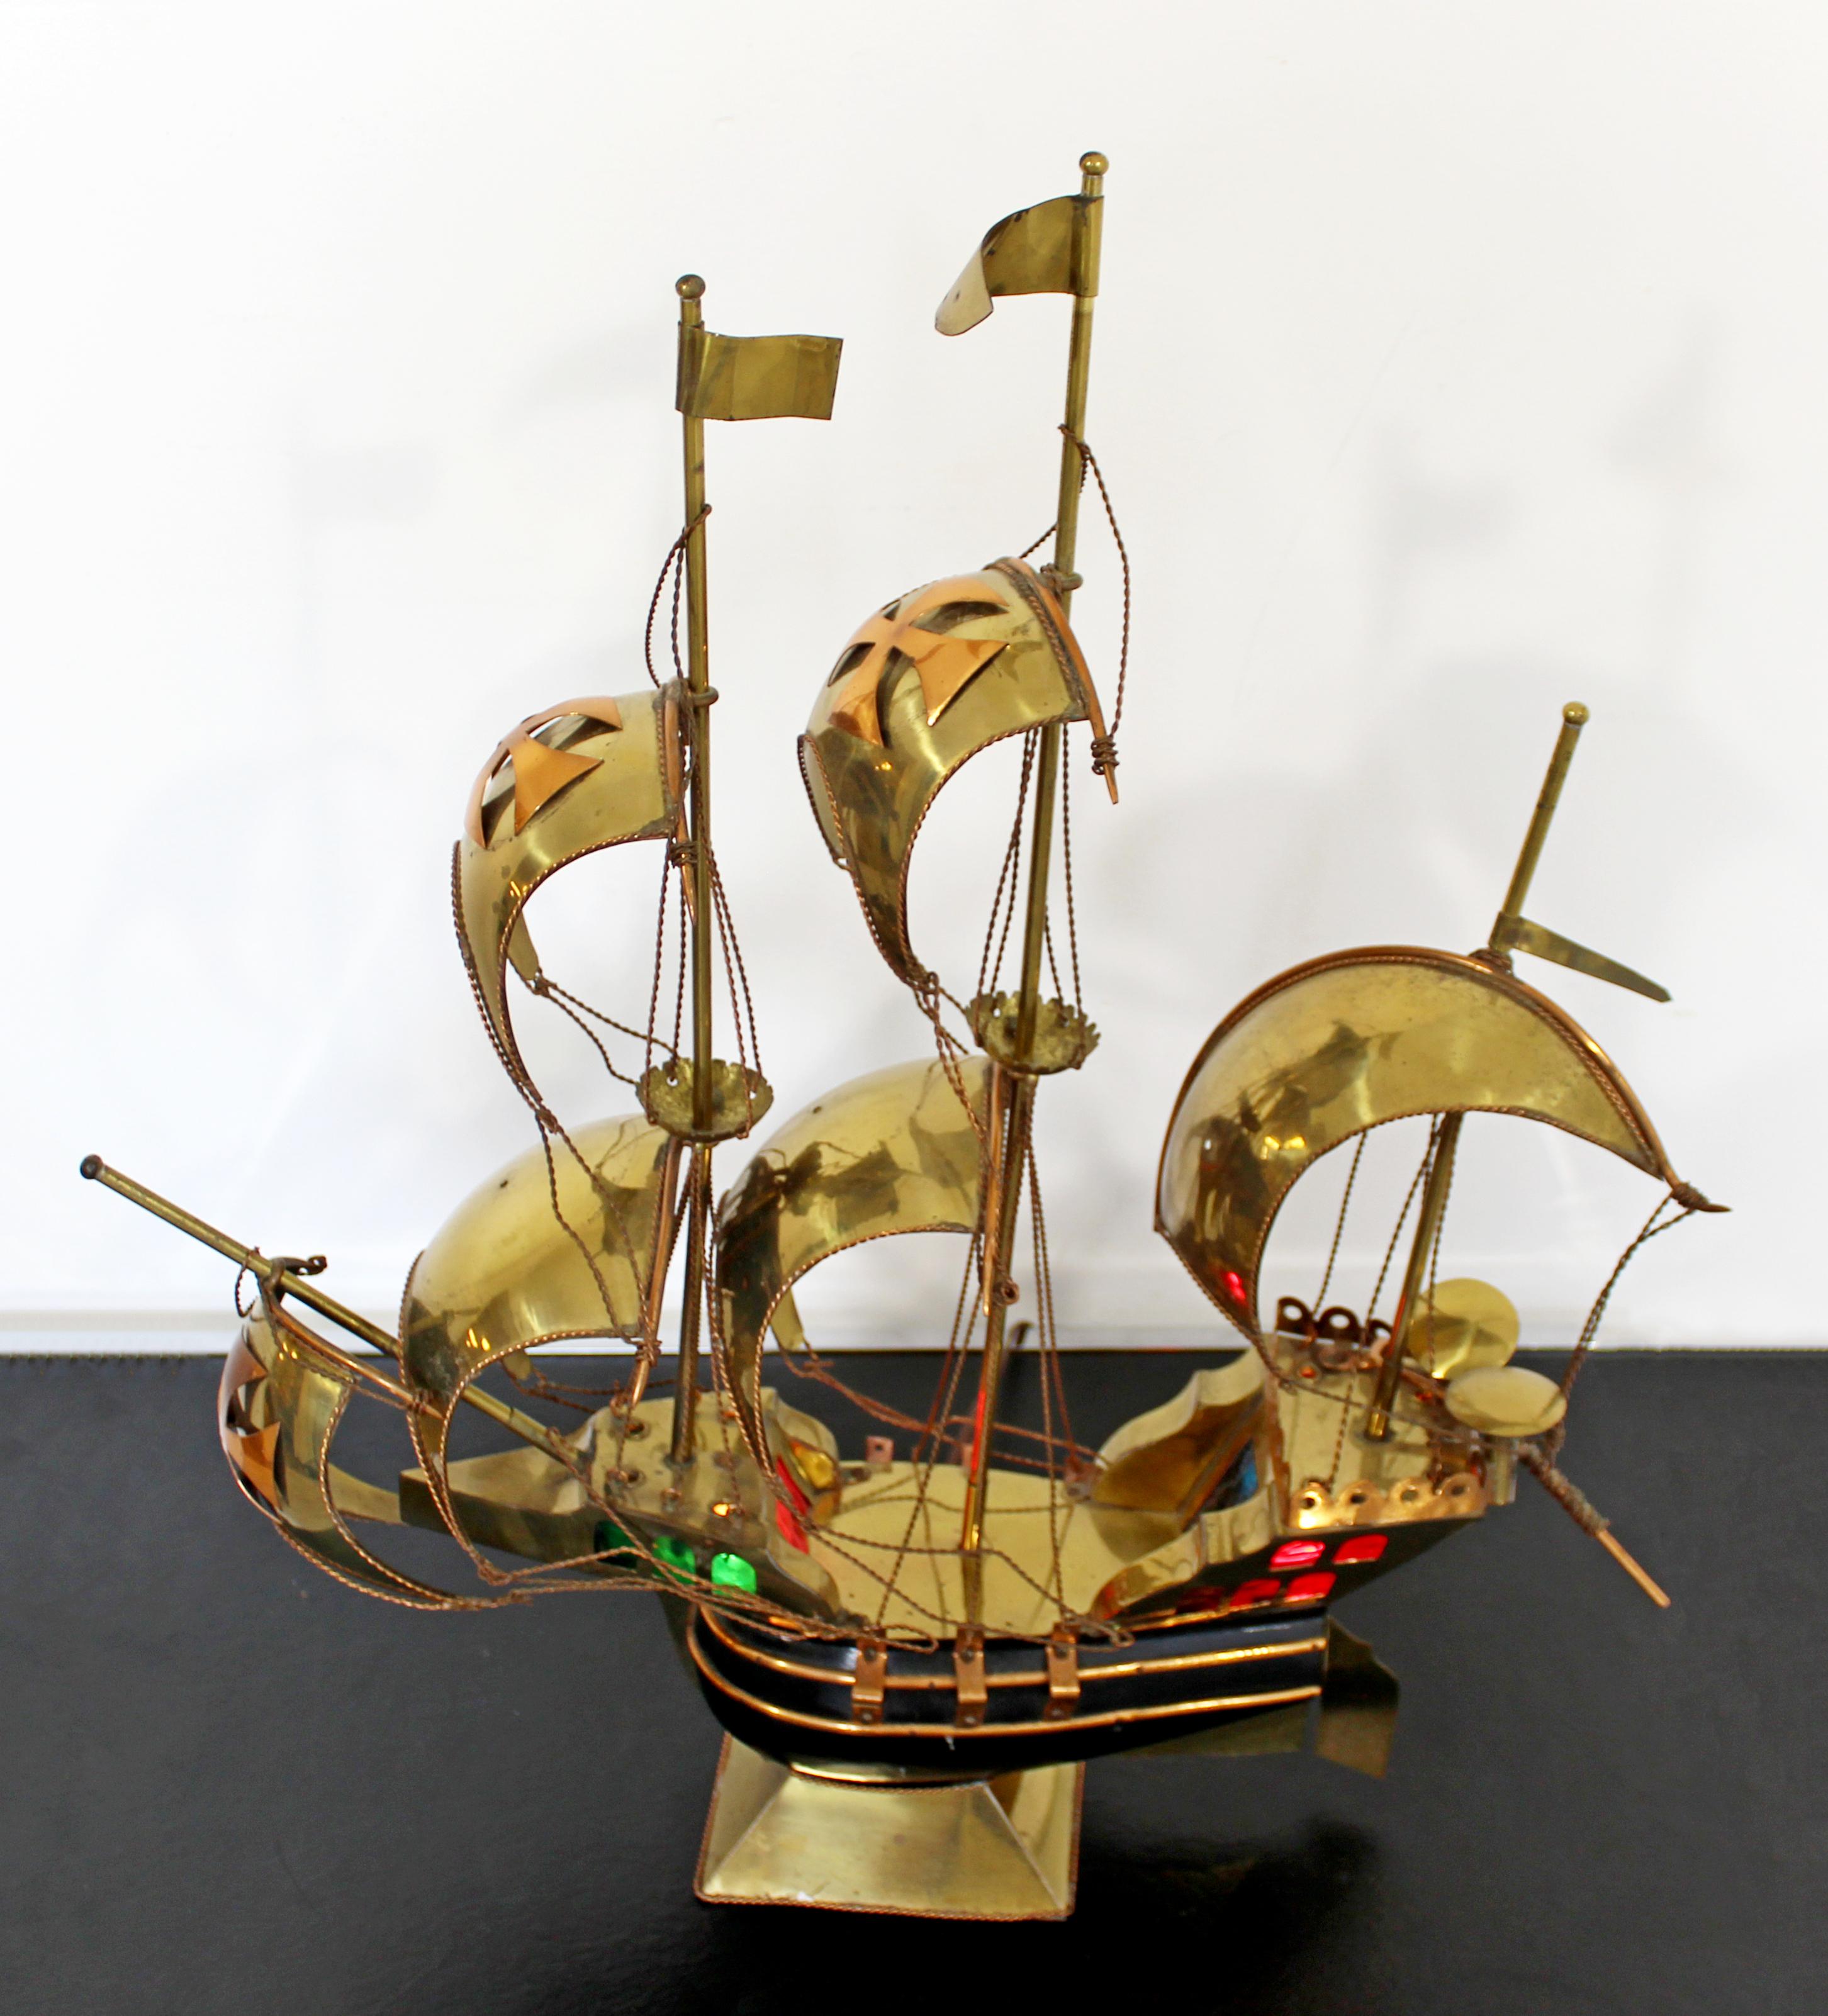 For your consideration is a unique, light up, brass and copper table sculpture of a sailboat, circa 1970s. In very good vintage condition. The dimensions are 22